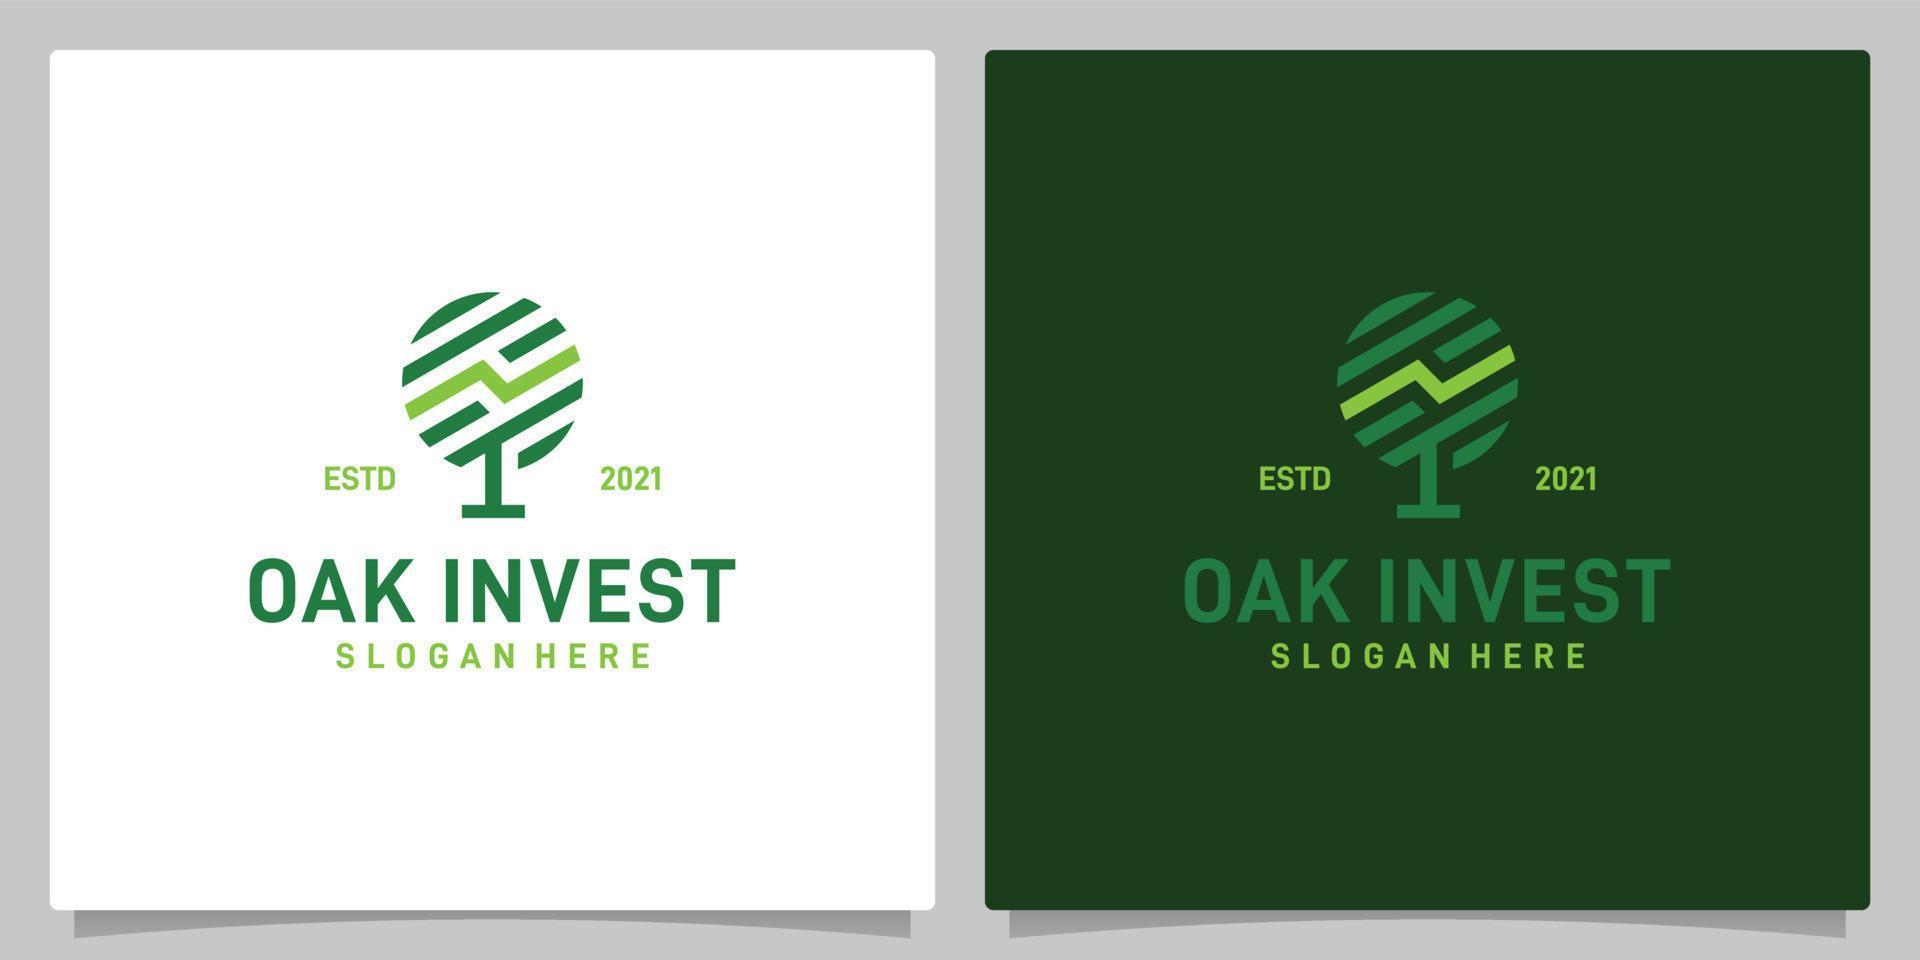 Vintage oak tree abstract design logo vector with analytic investment logo inspiration. Premium vector